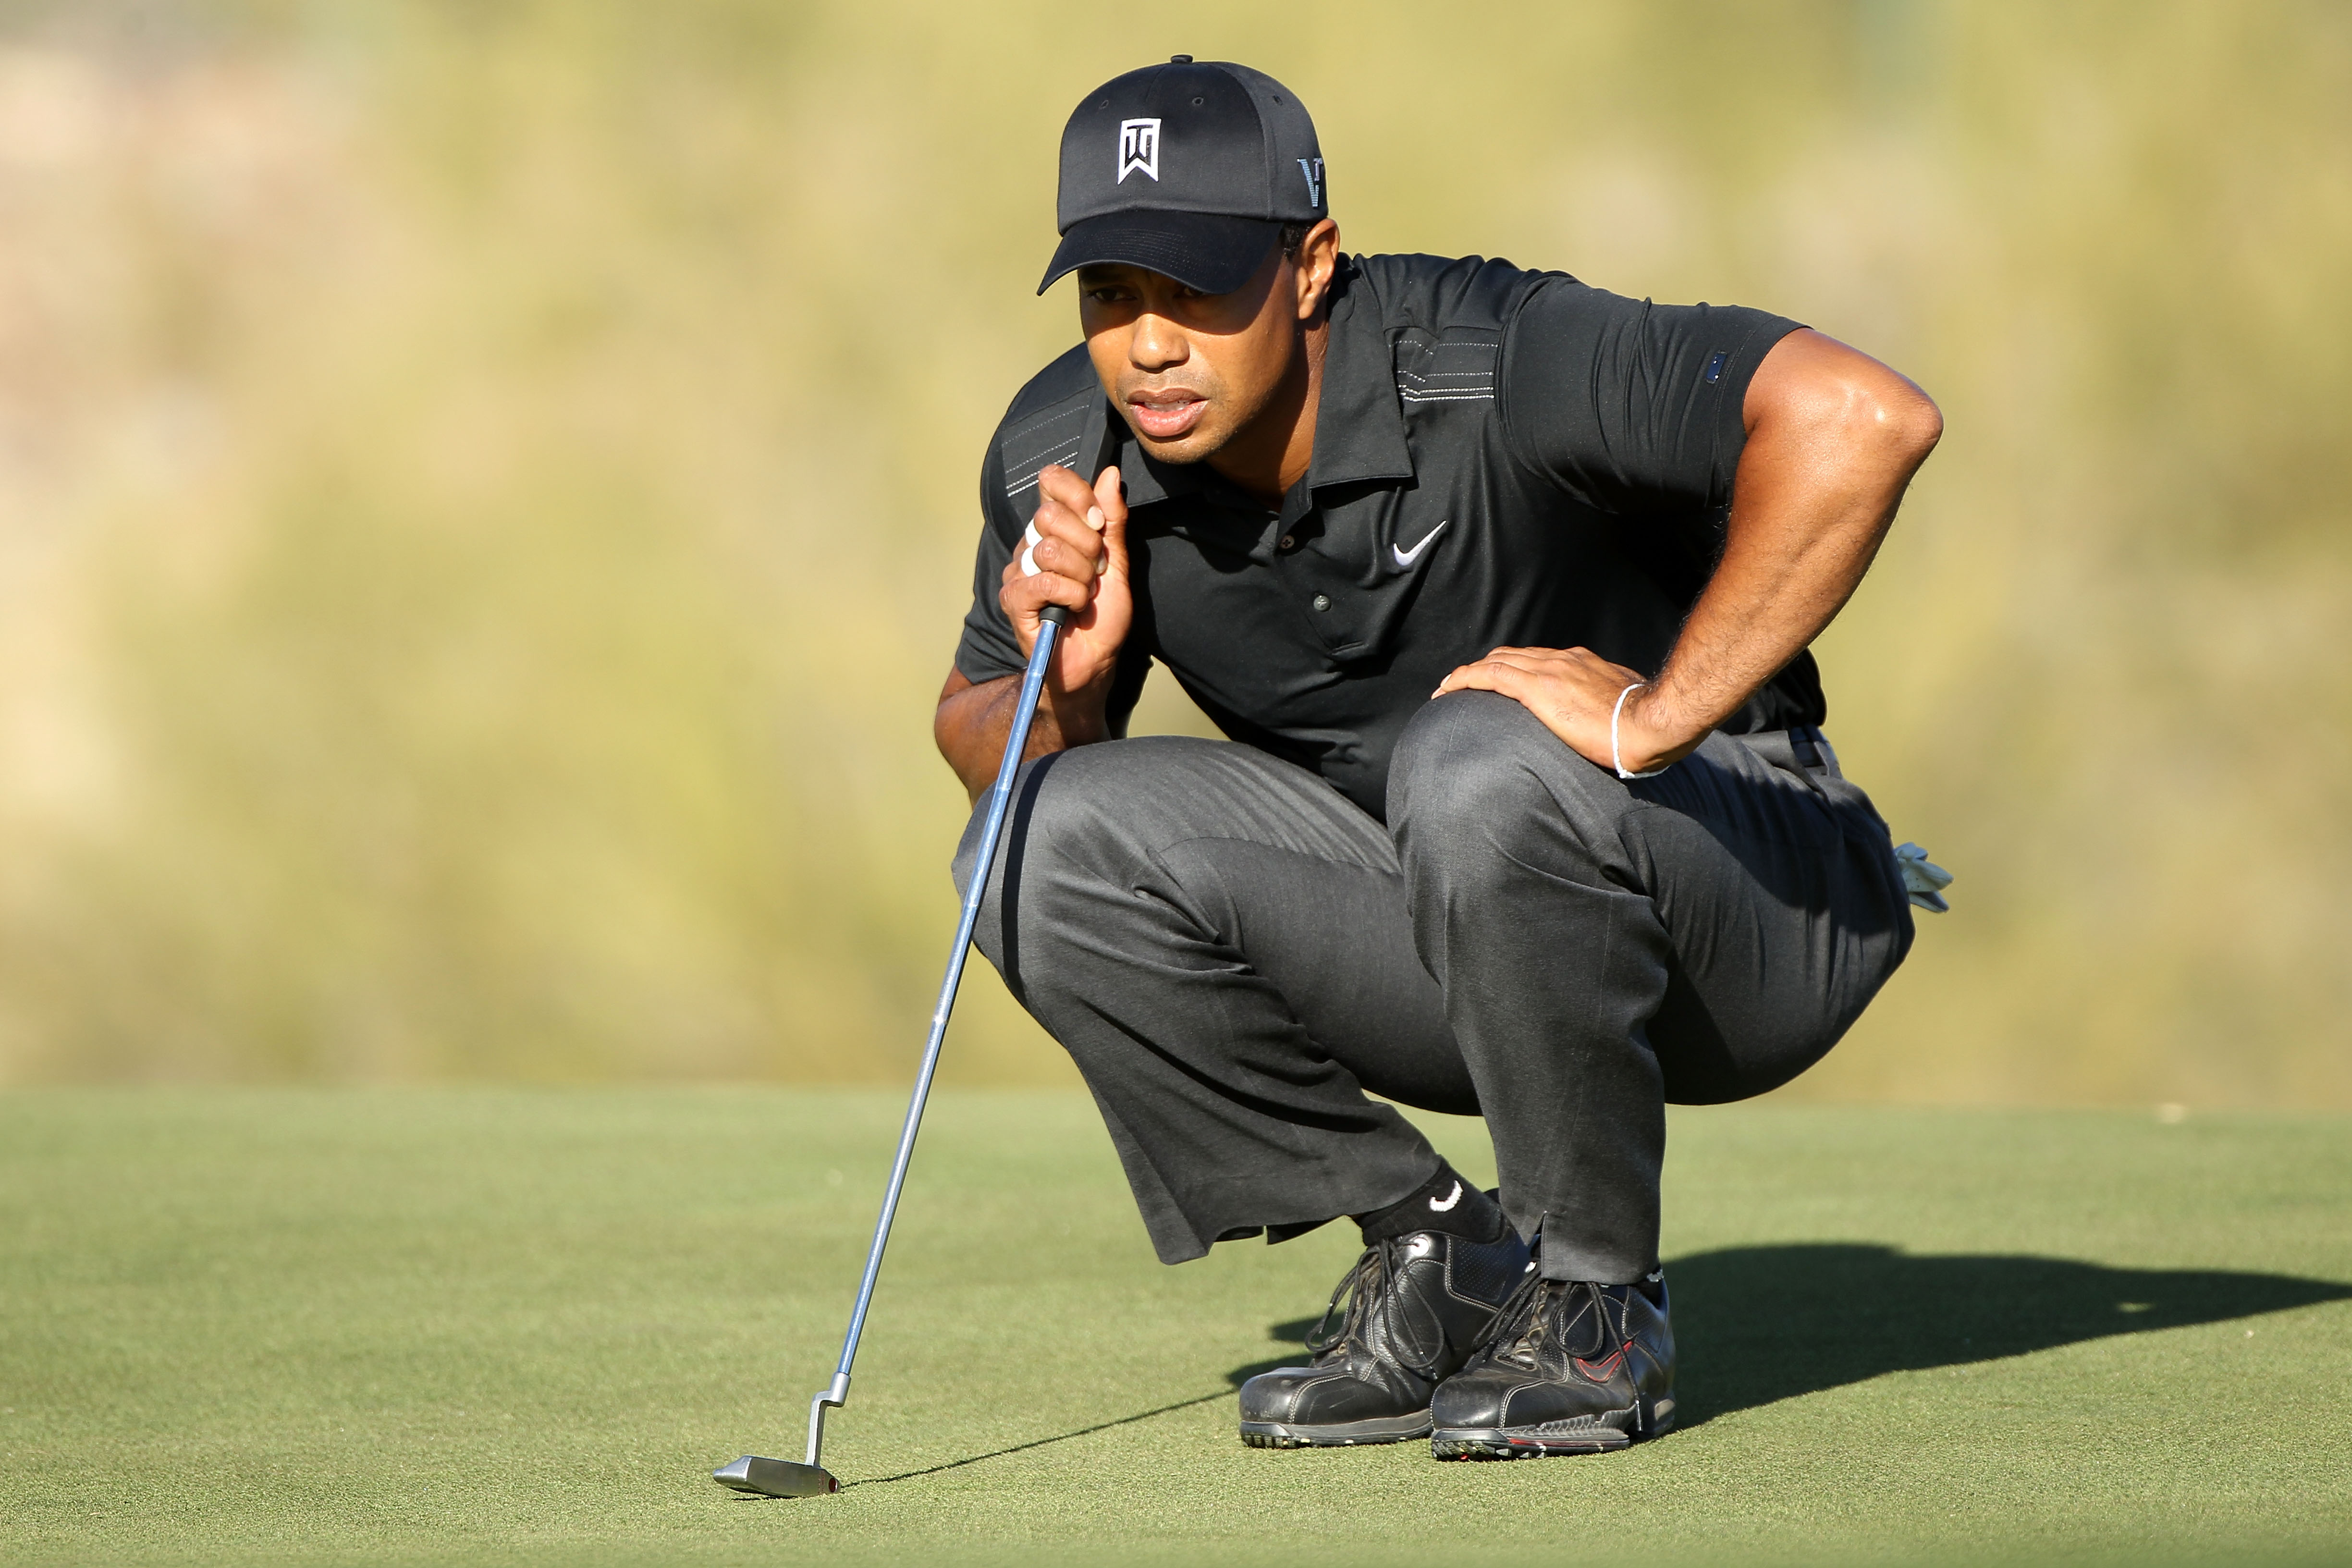 MARANA, AZ - FEBRUARY 23:  Tiger Woods lines up a putt on the 17th hole during the first round of the Accenture Match Play Championship at the Ritz-Carlton Golf Club on February 23, 2011 in Marana, Arizona.  (Photo by Andy Lyons/Getty Images)